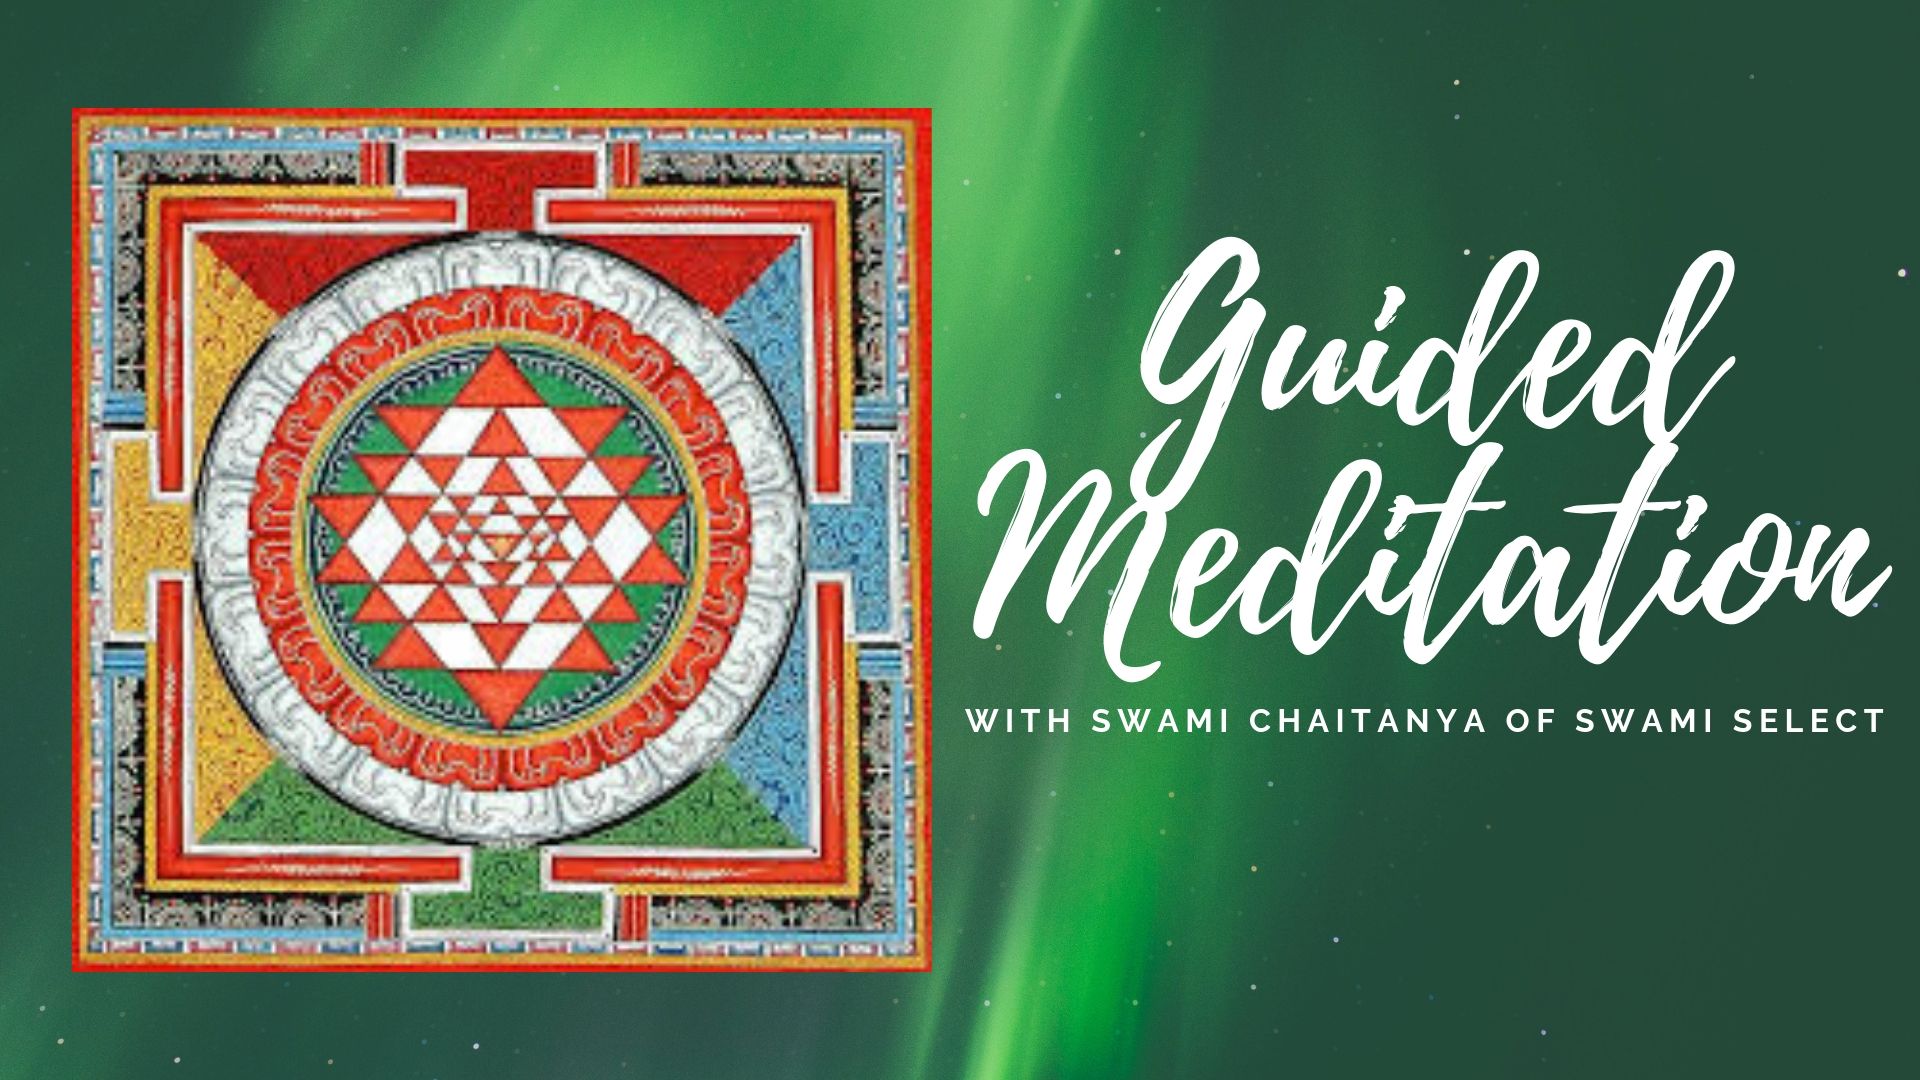 Guided Meditation with Swami Chaitanya of Swami Select